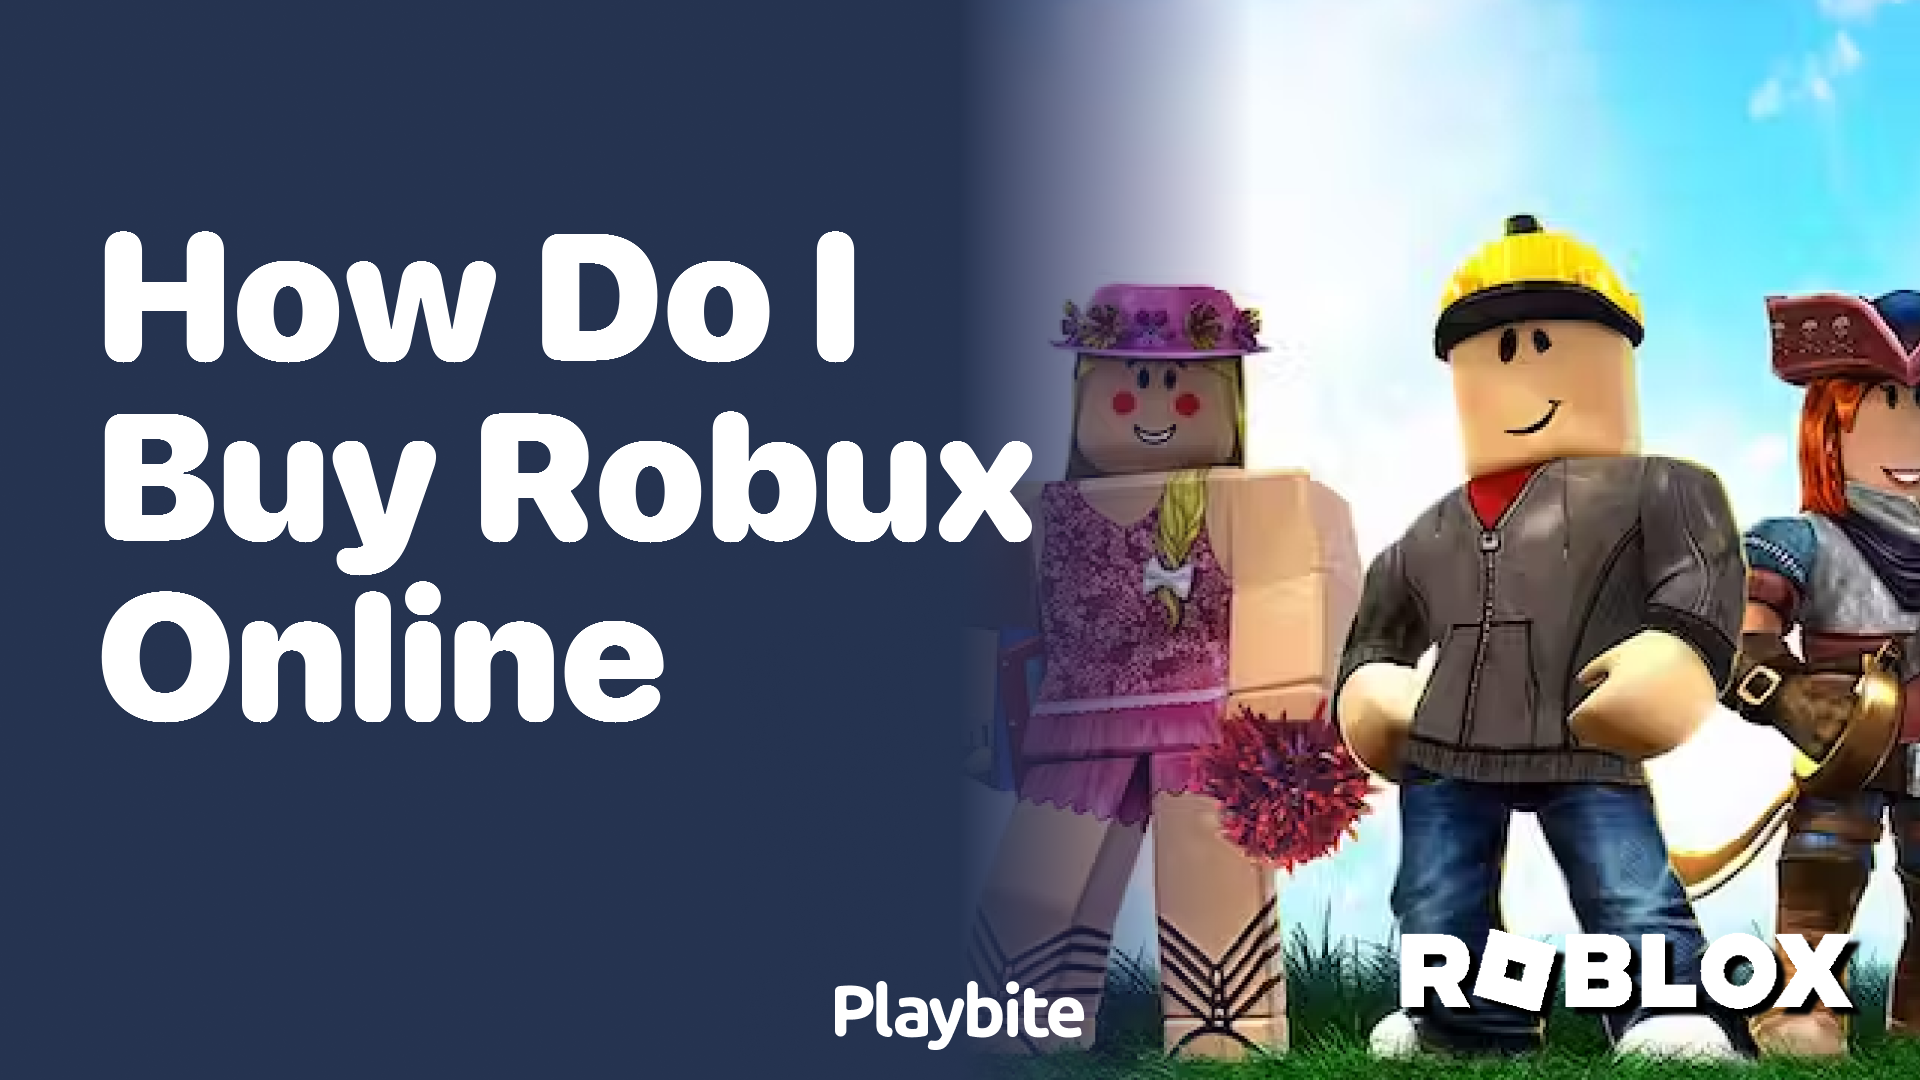 How Do I Buy Robux Online? Your Quick Guide